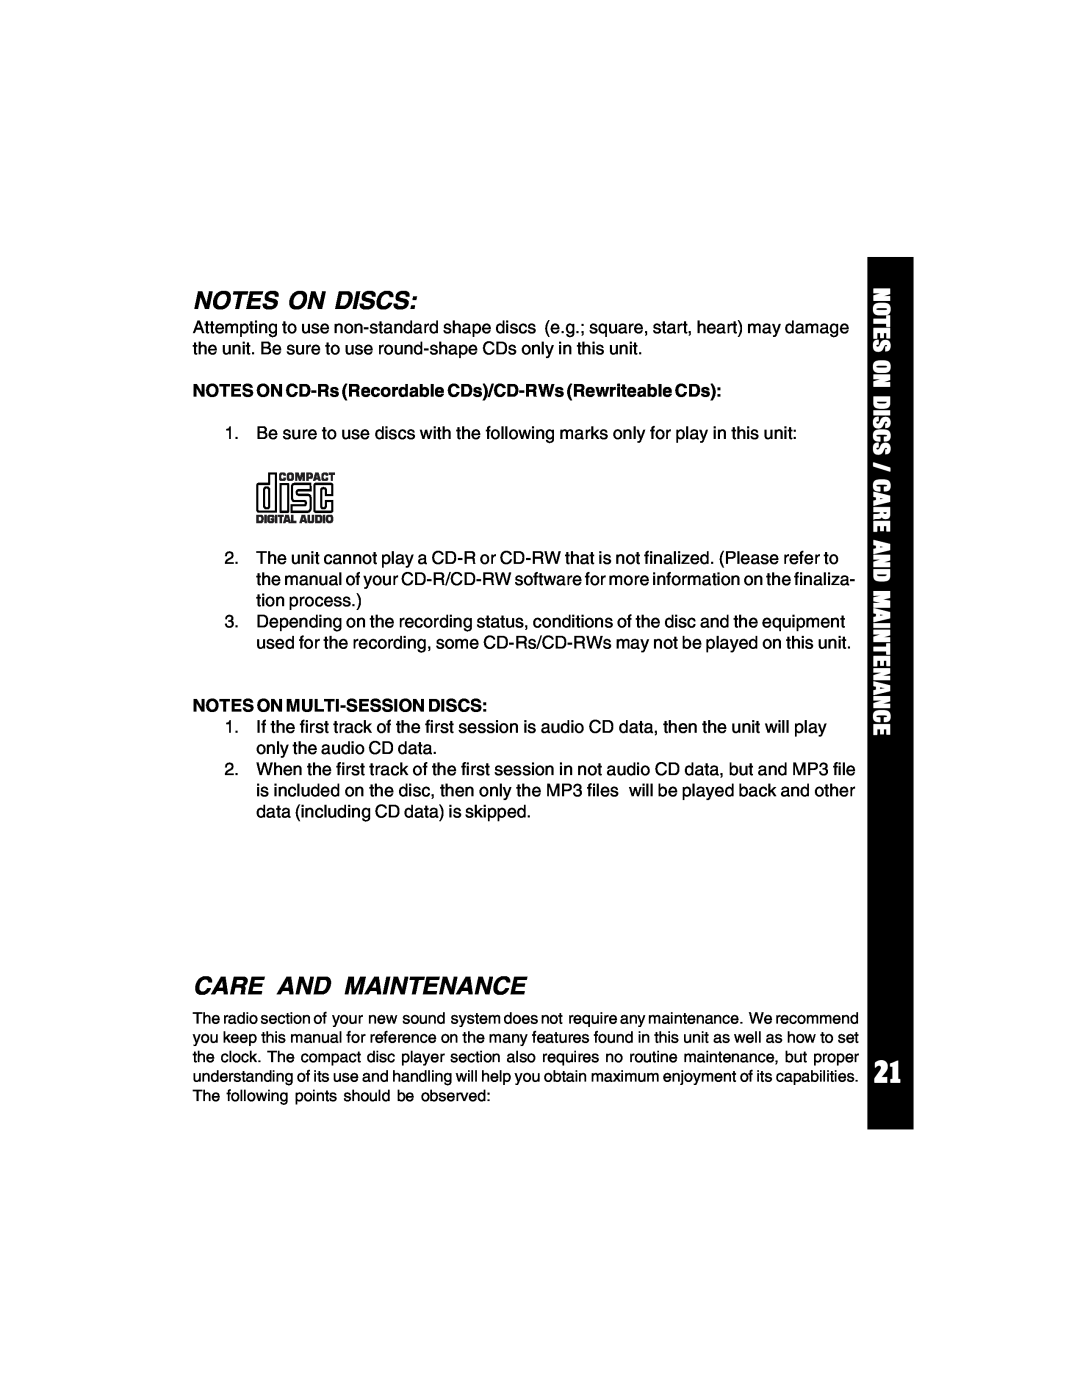 Auto Page ACD-94 manual Notes On Discs / Care And Maintenance, Notes On Multi-Sessiondiscs 